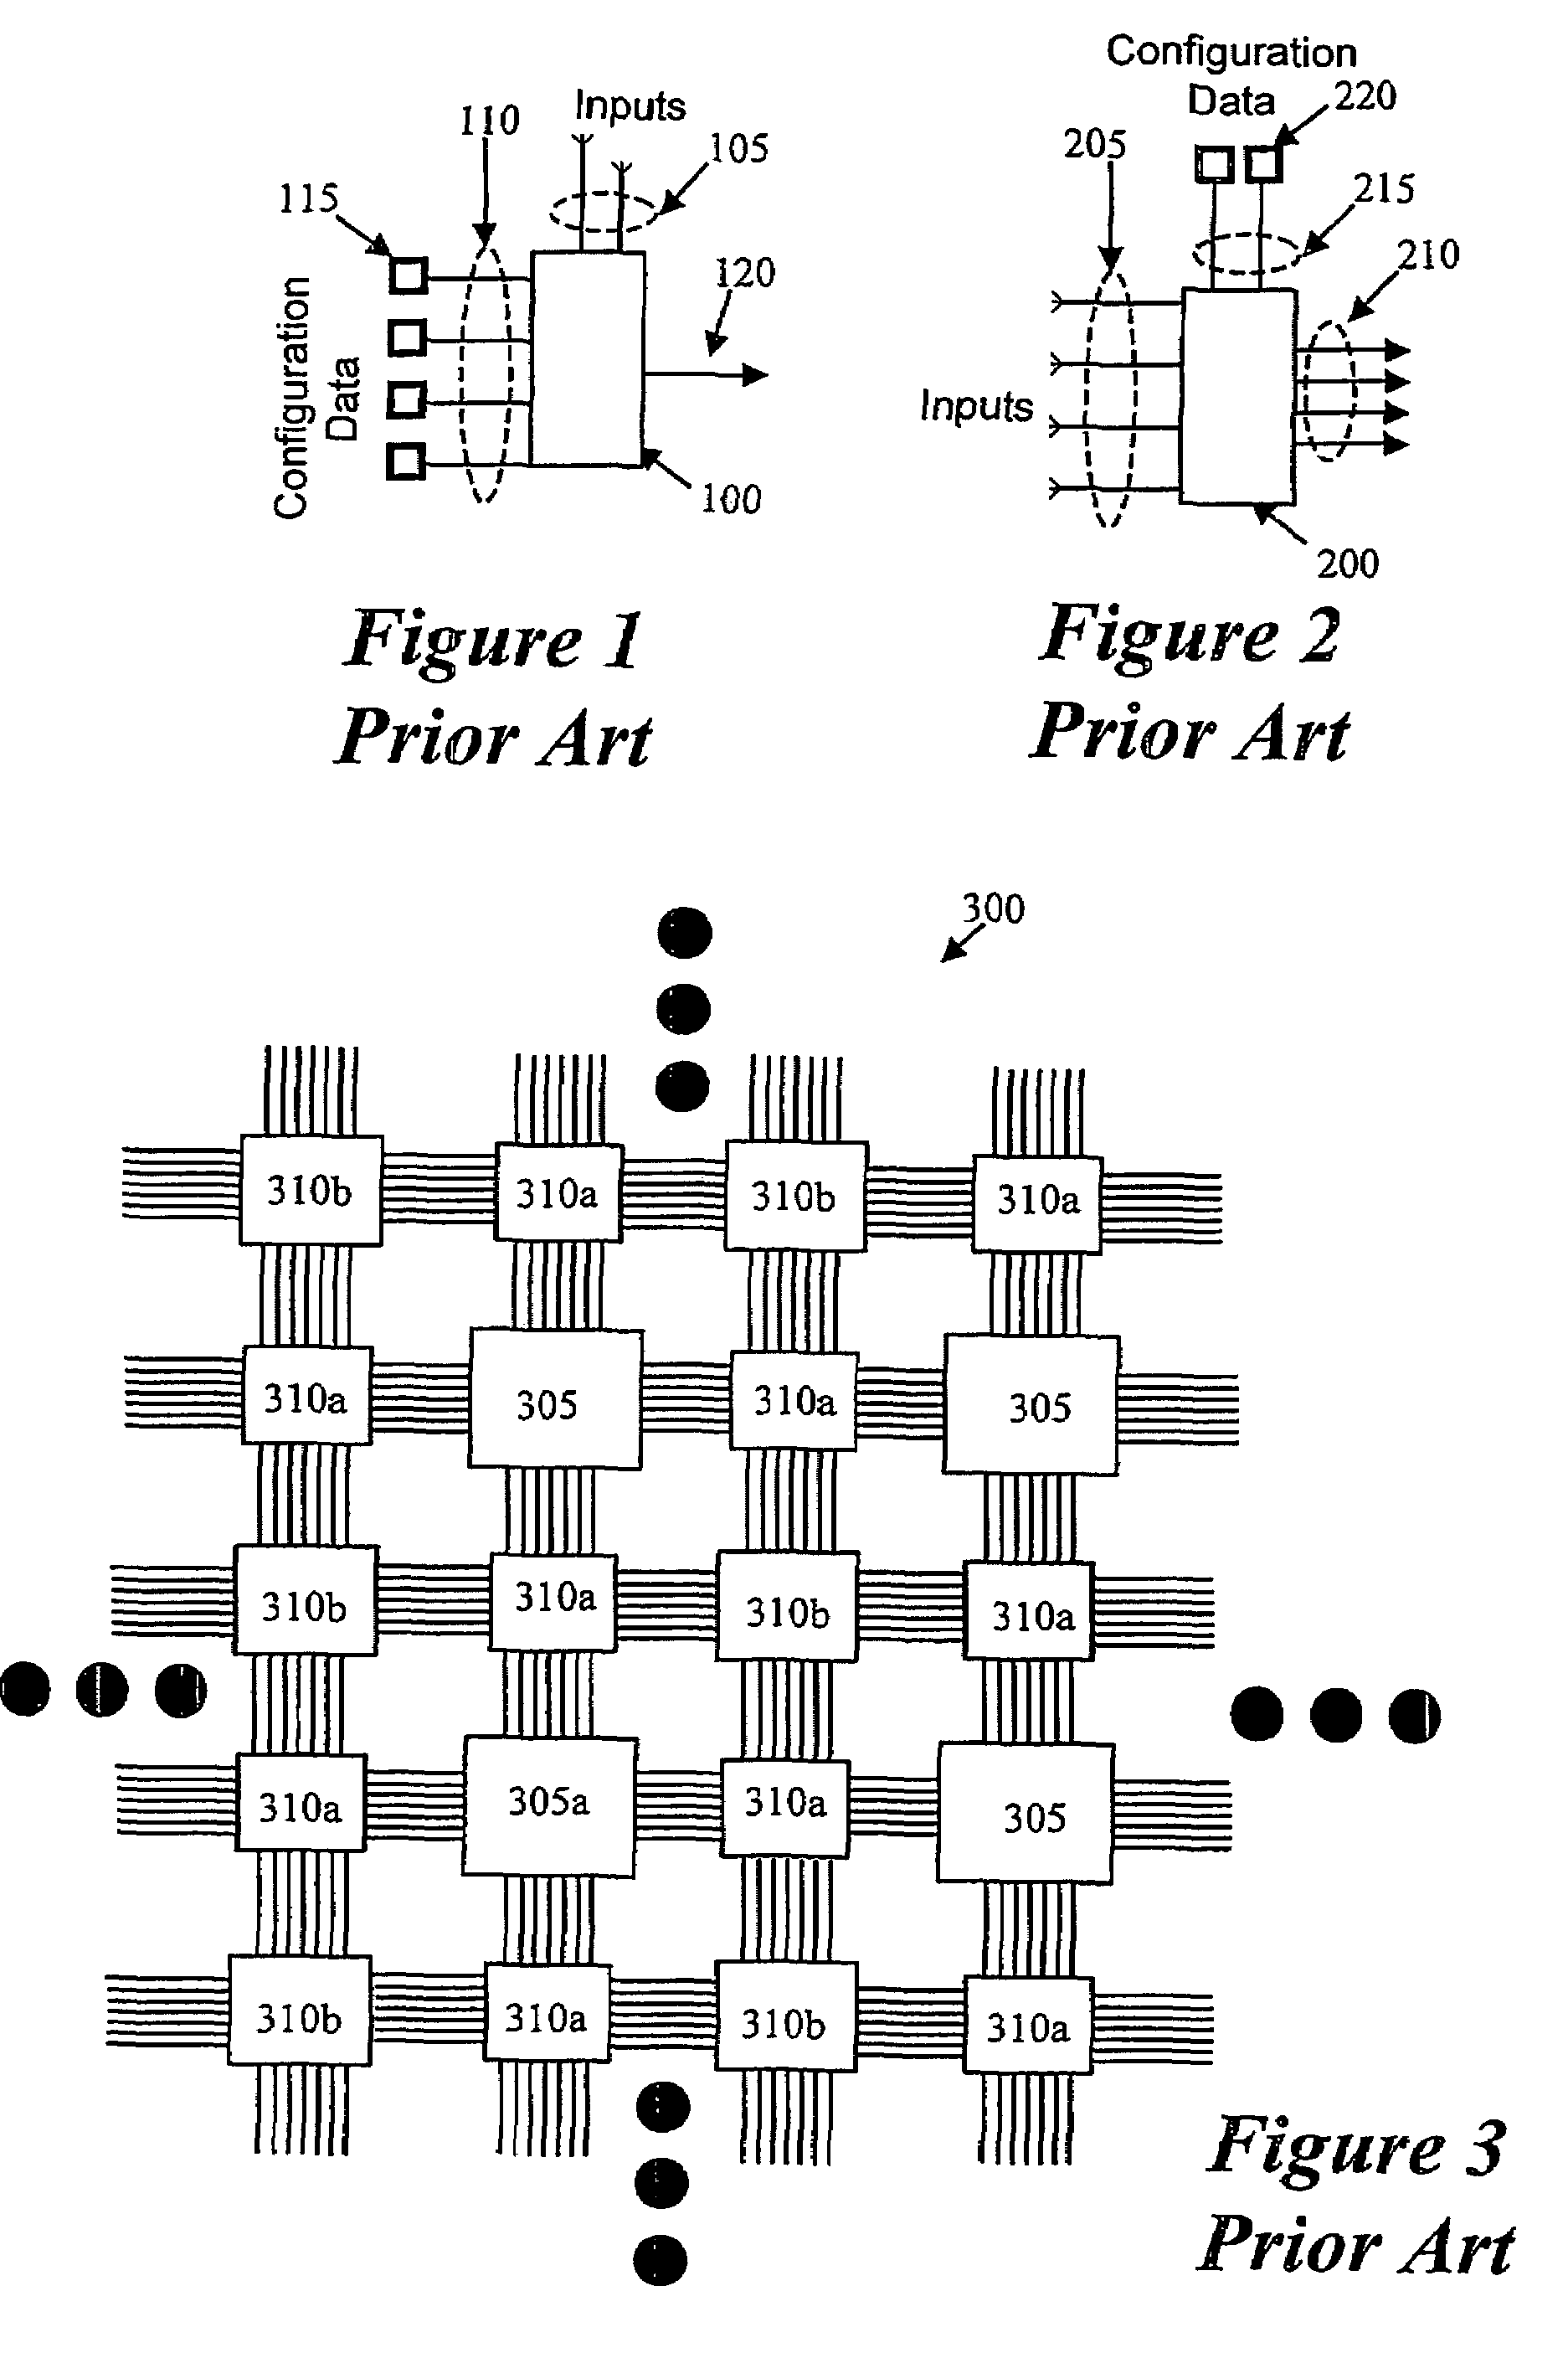 Barrel shifter implemented on a configurable integrated circuit